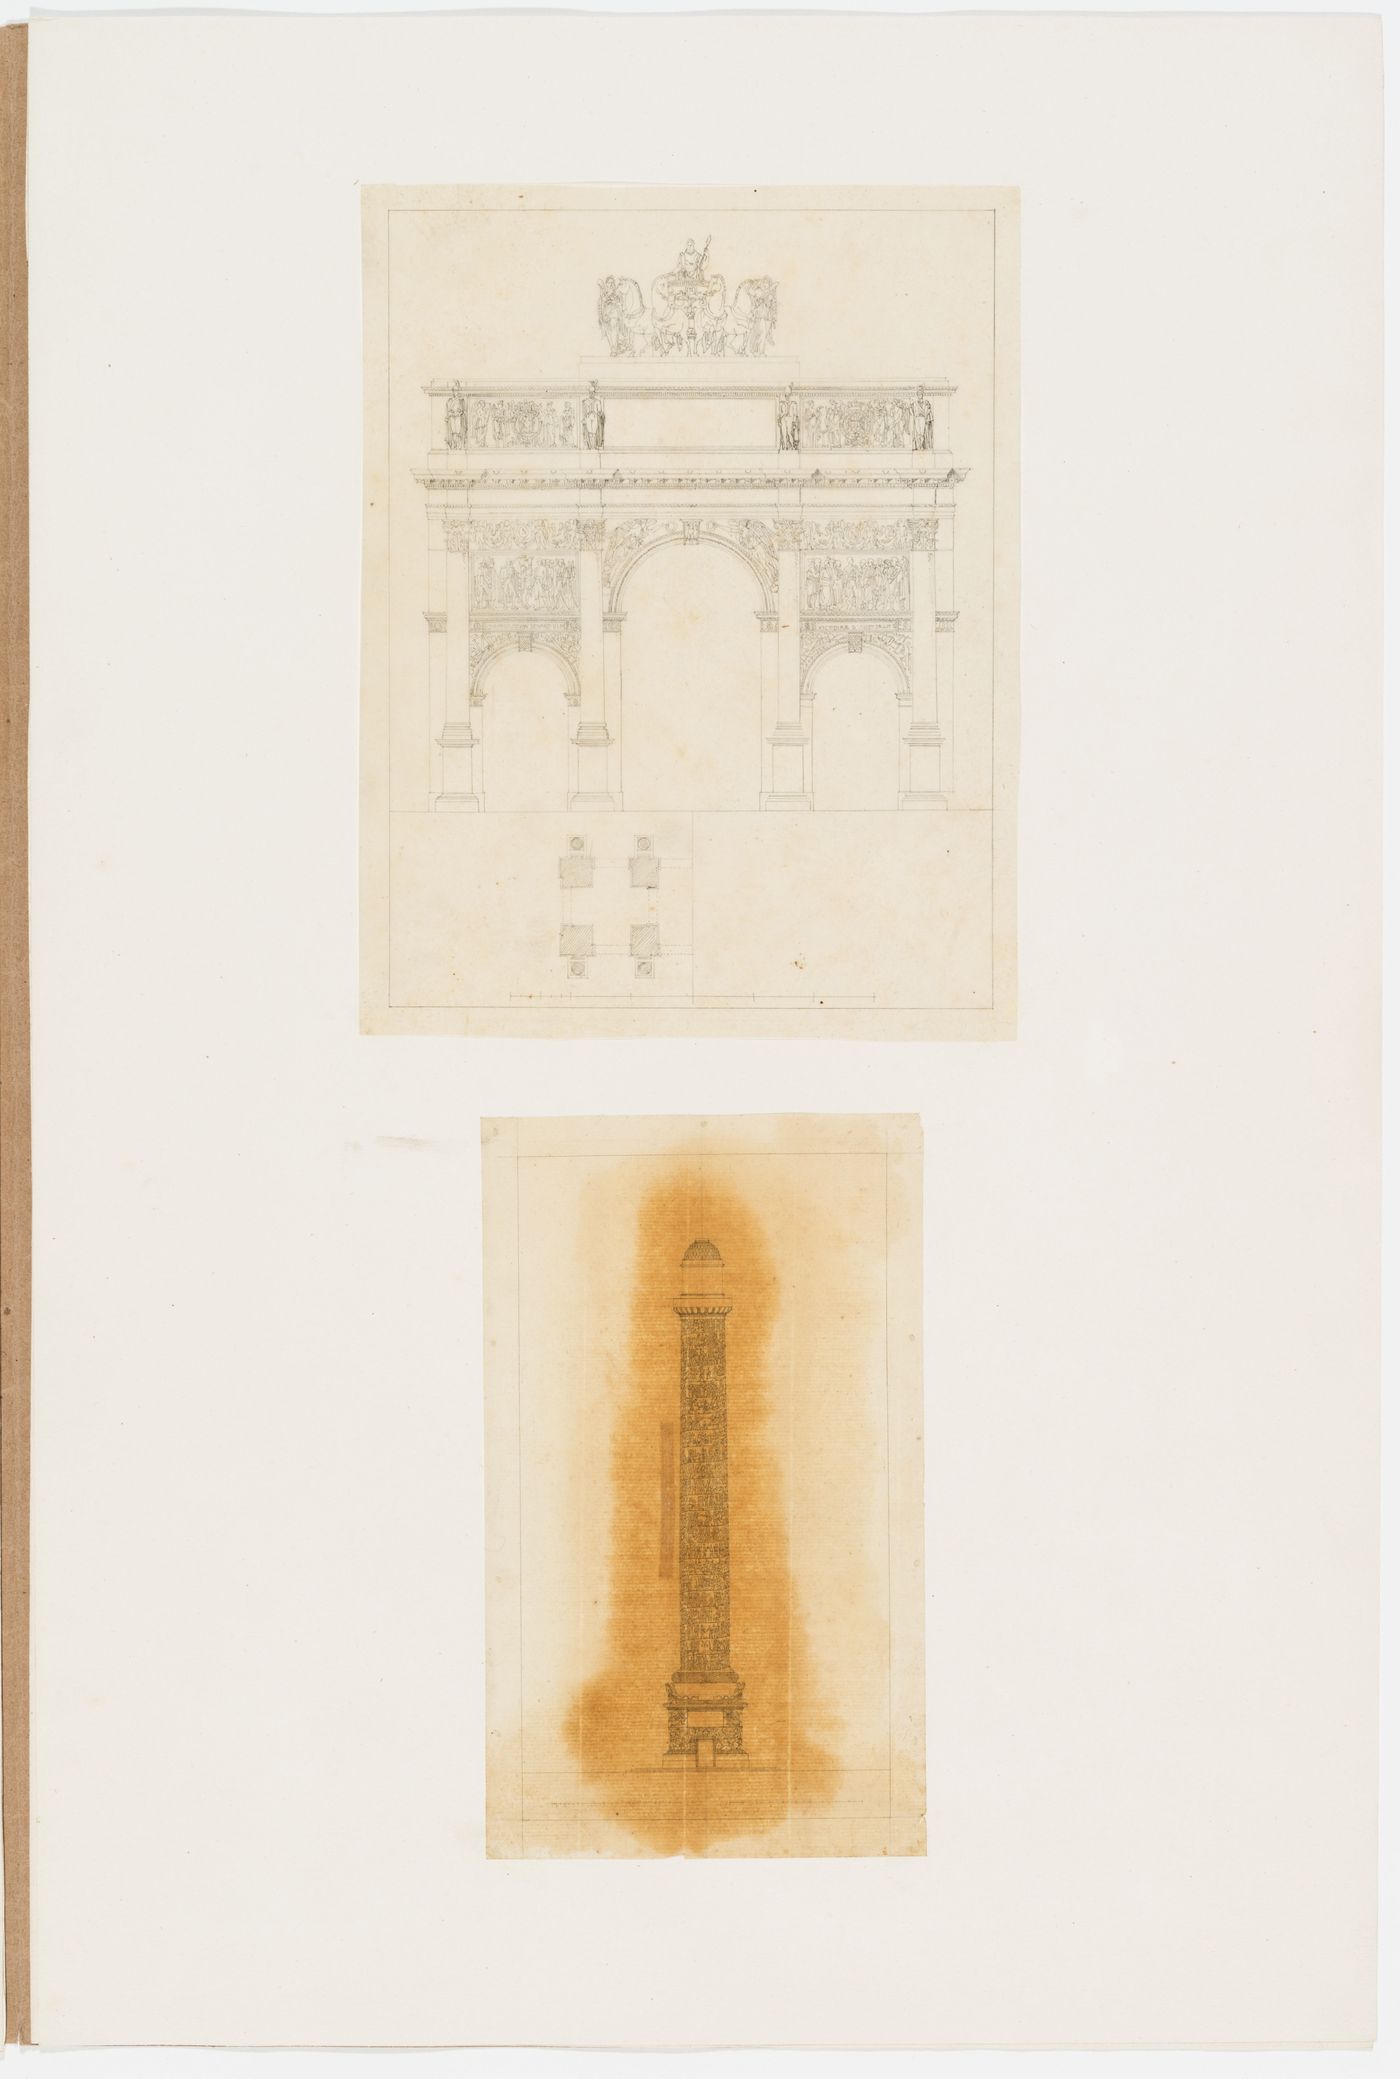 Elevation of the Arc du Carrousel, Paris, with a partial ground plan showing the left half of the monument; Elevation of the Vendome Column, Paris, showing the continuous spiral of low-relief sculpture